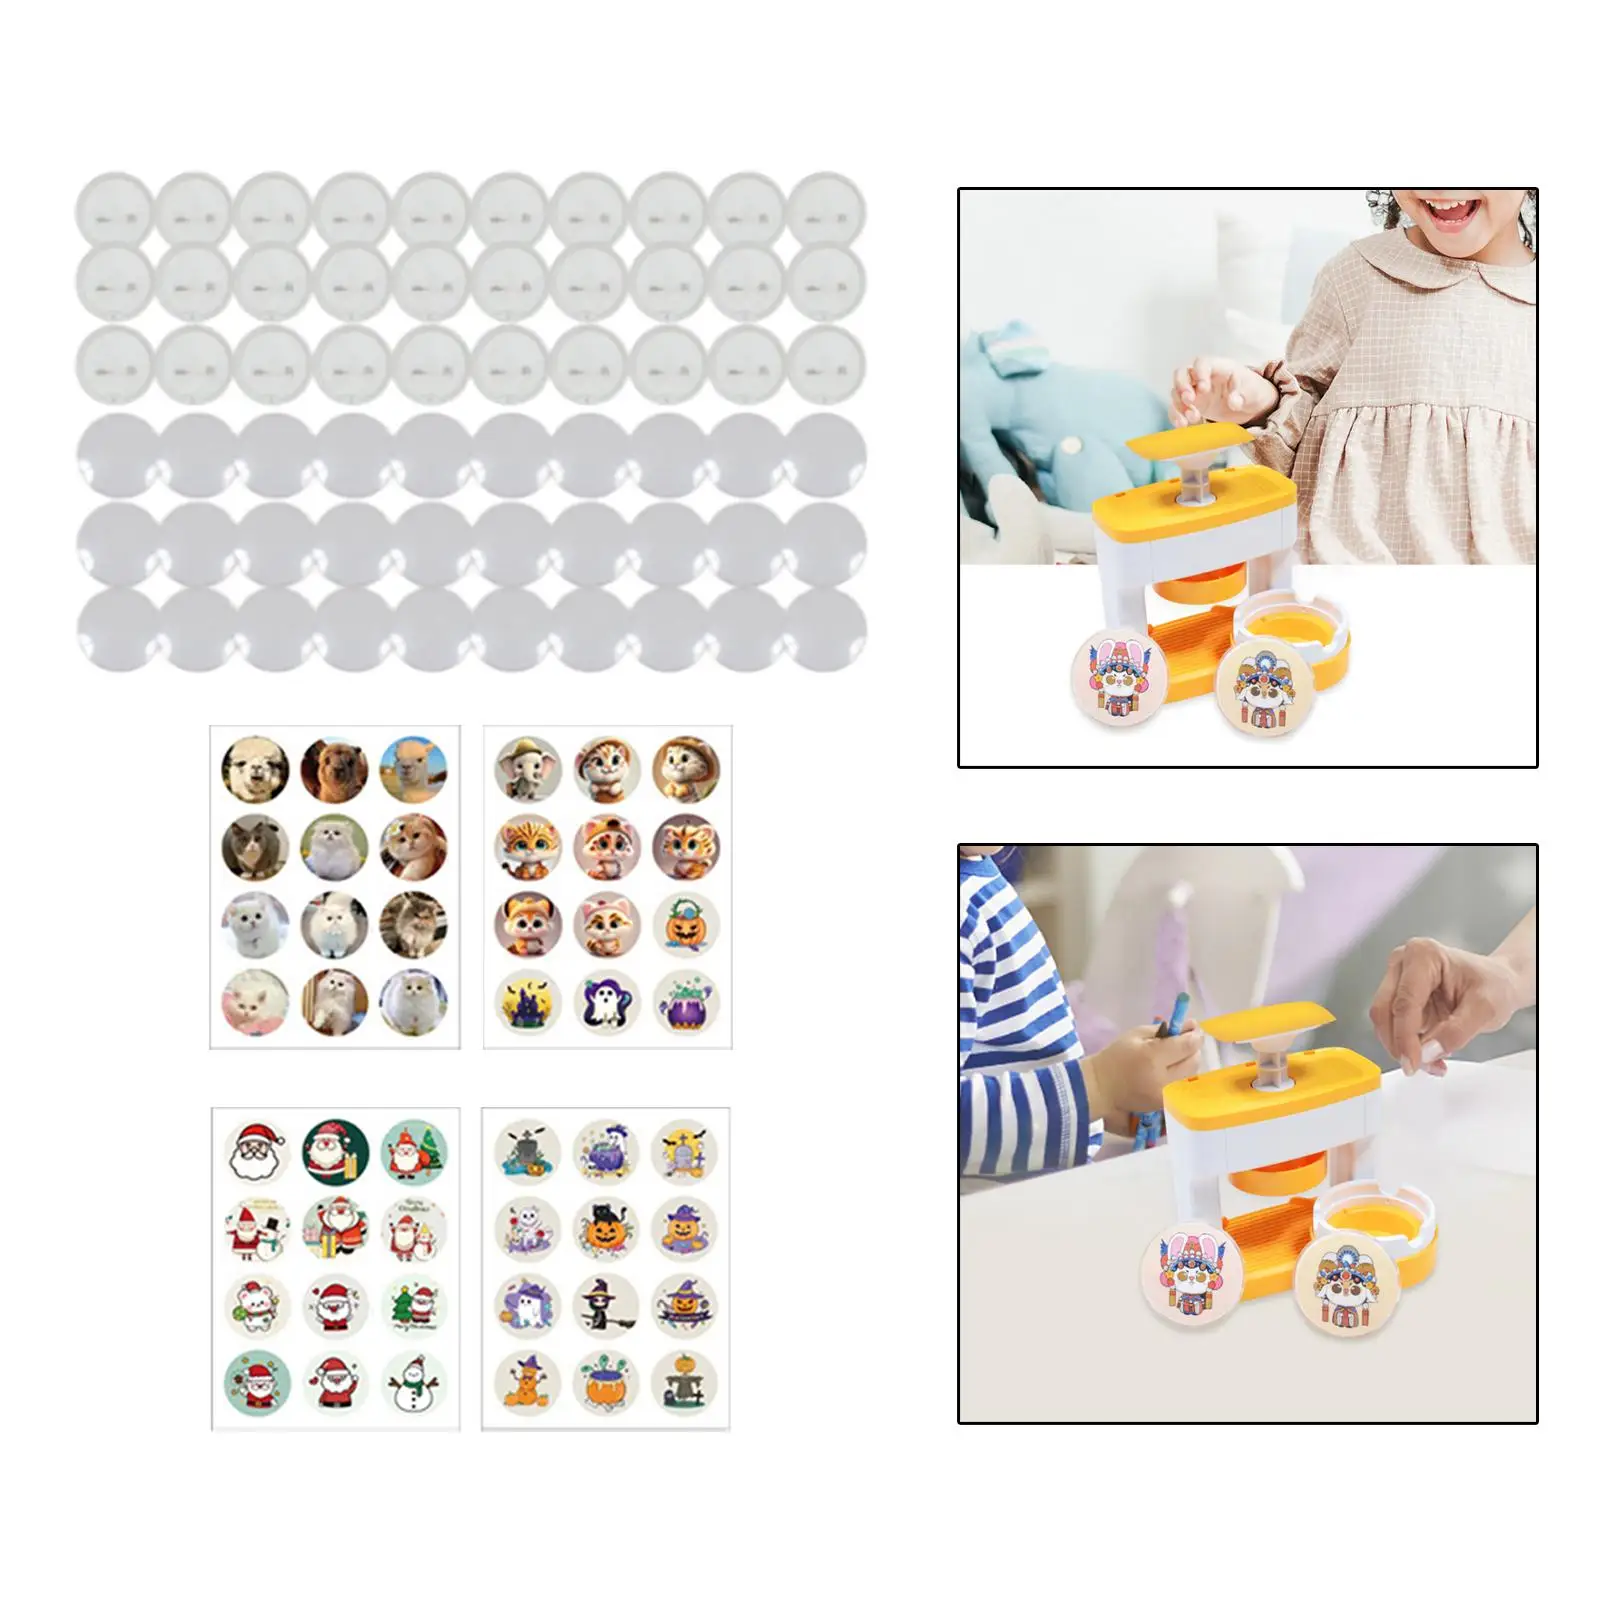 Button Badge Machine DIY Badges Set Upgrade Interchangeable Durable Round Shape Multiple Crafts for Girls Children Learning Toy